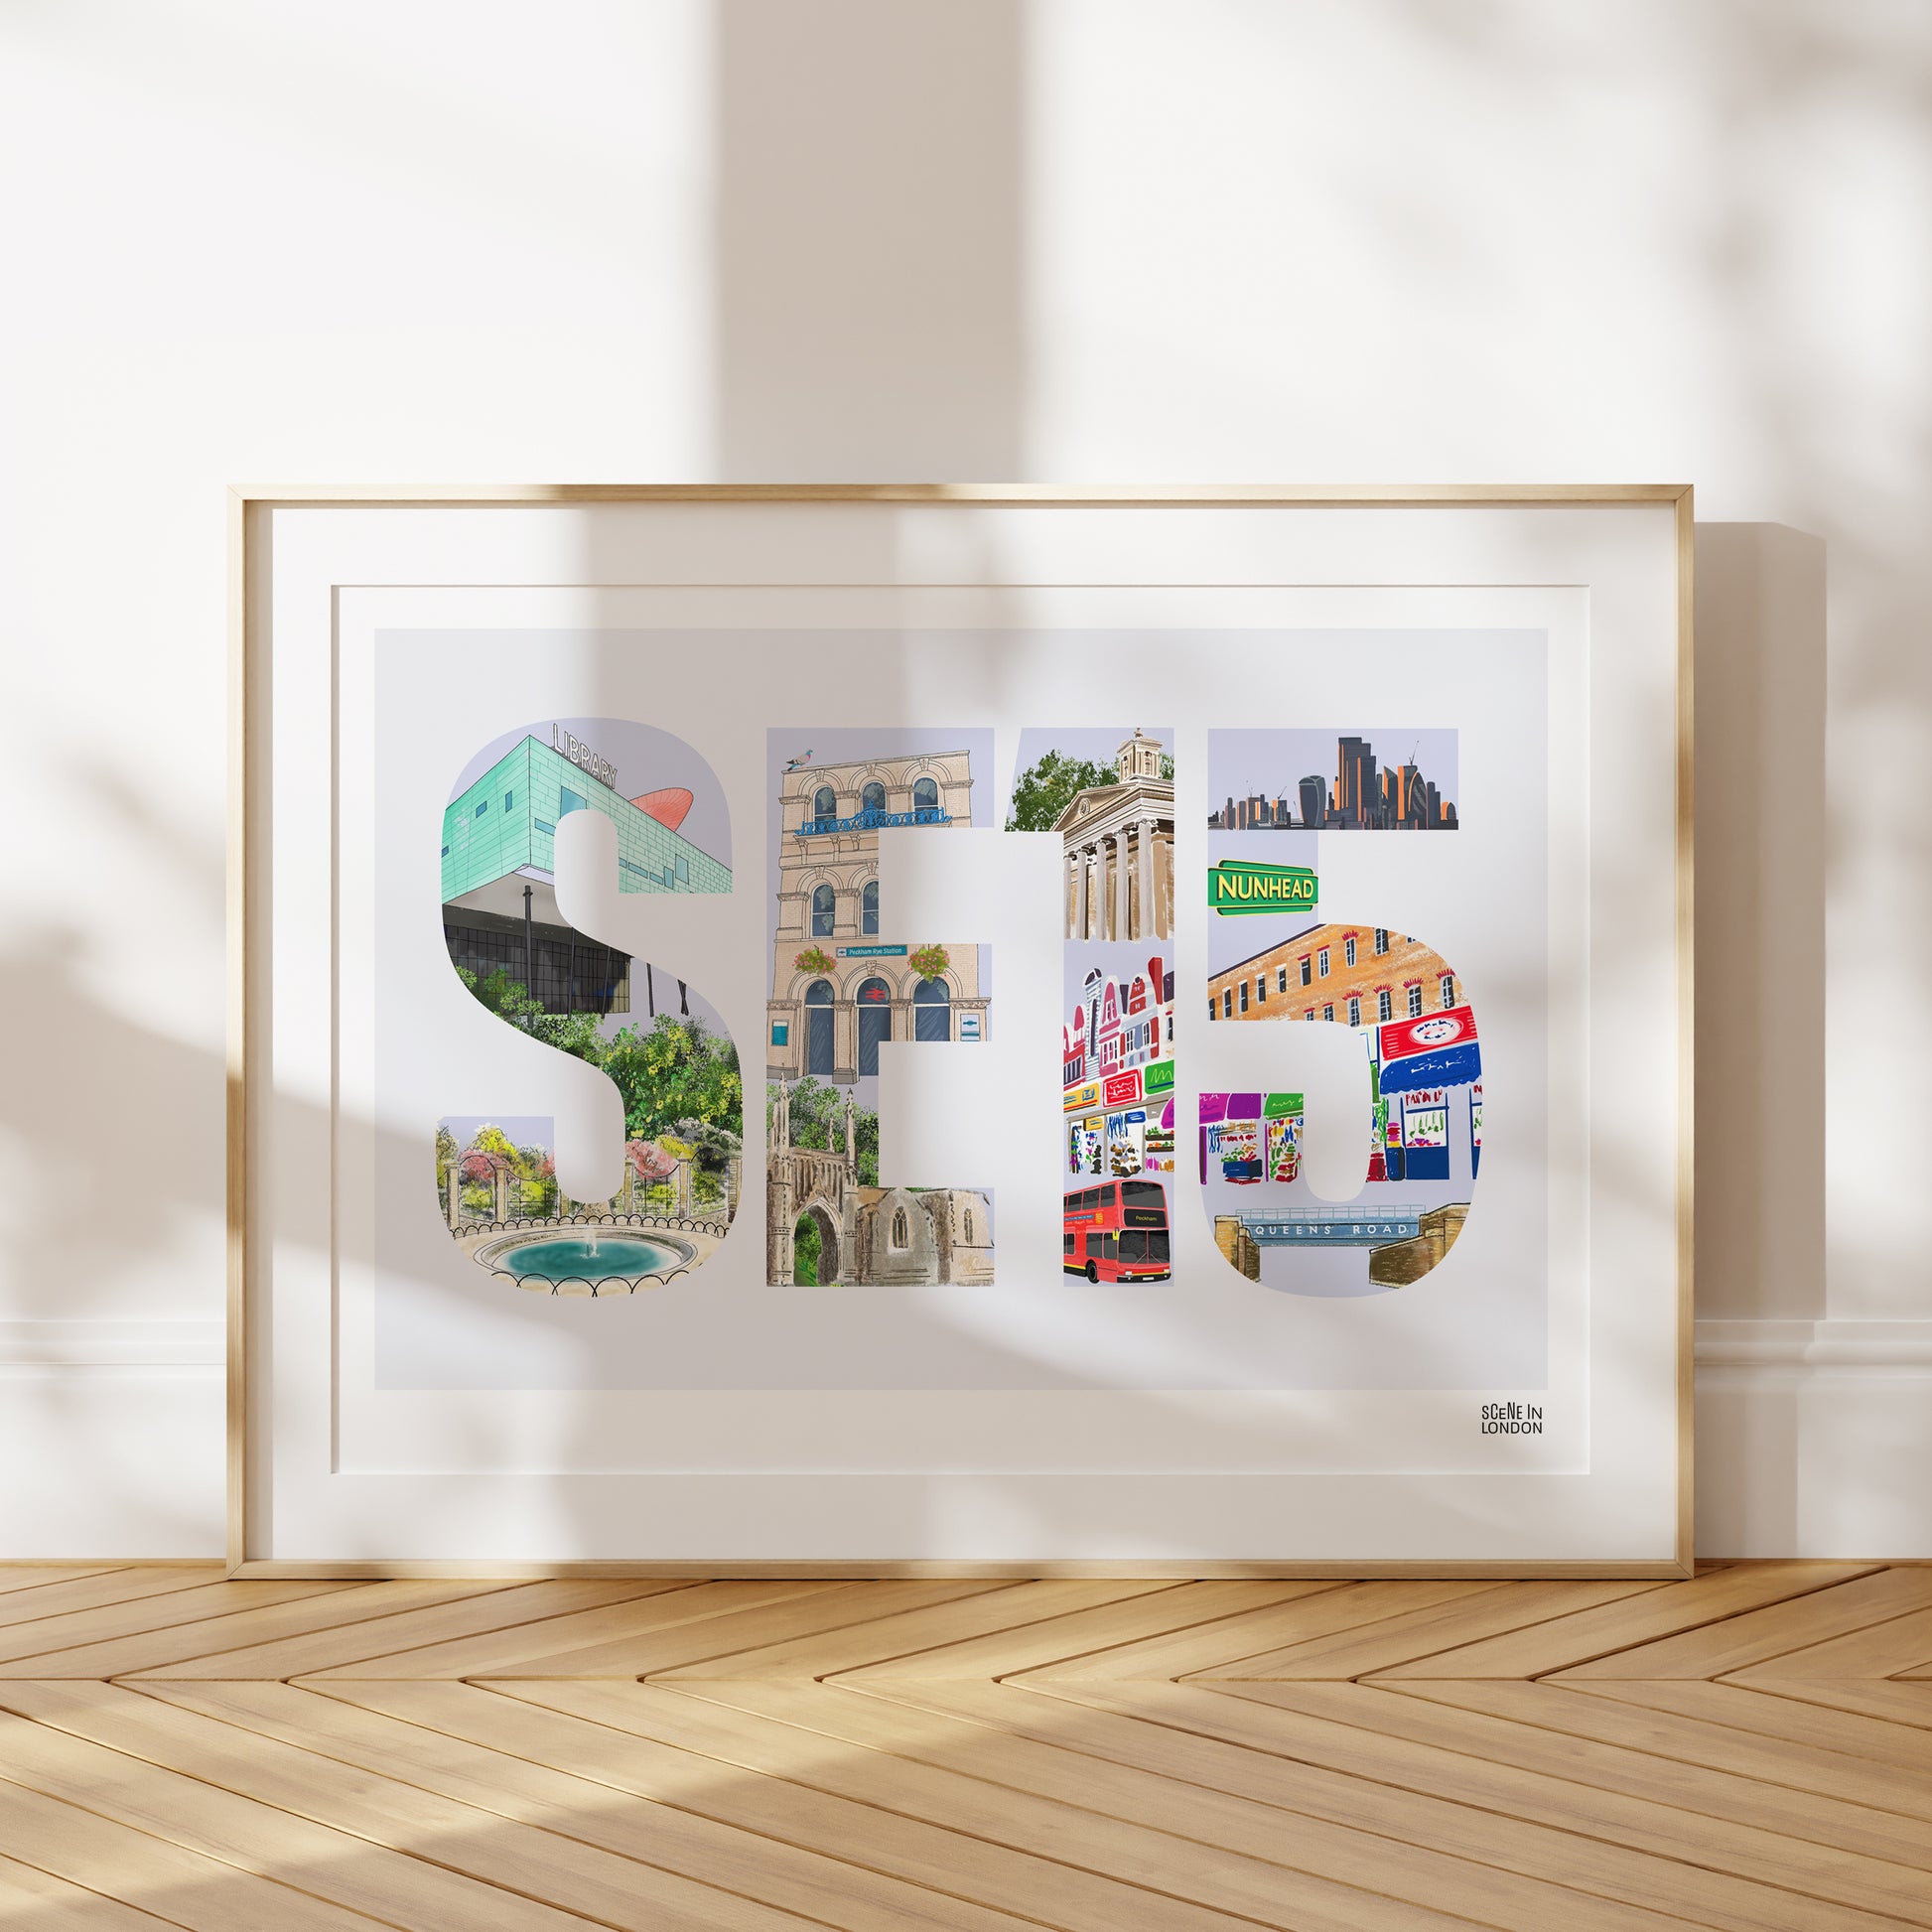 SE15 London Print featuring places in Peckham Nunhead